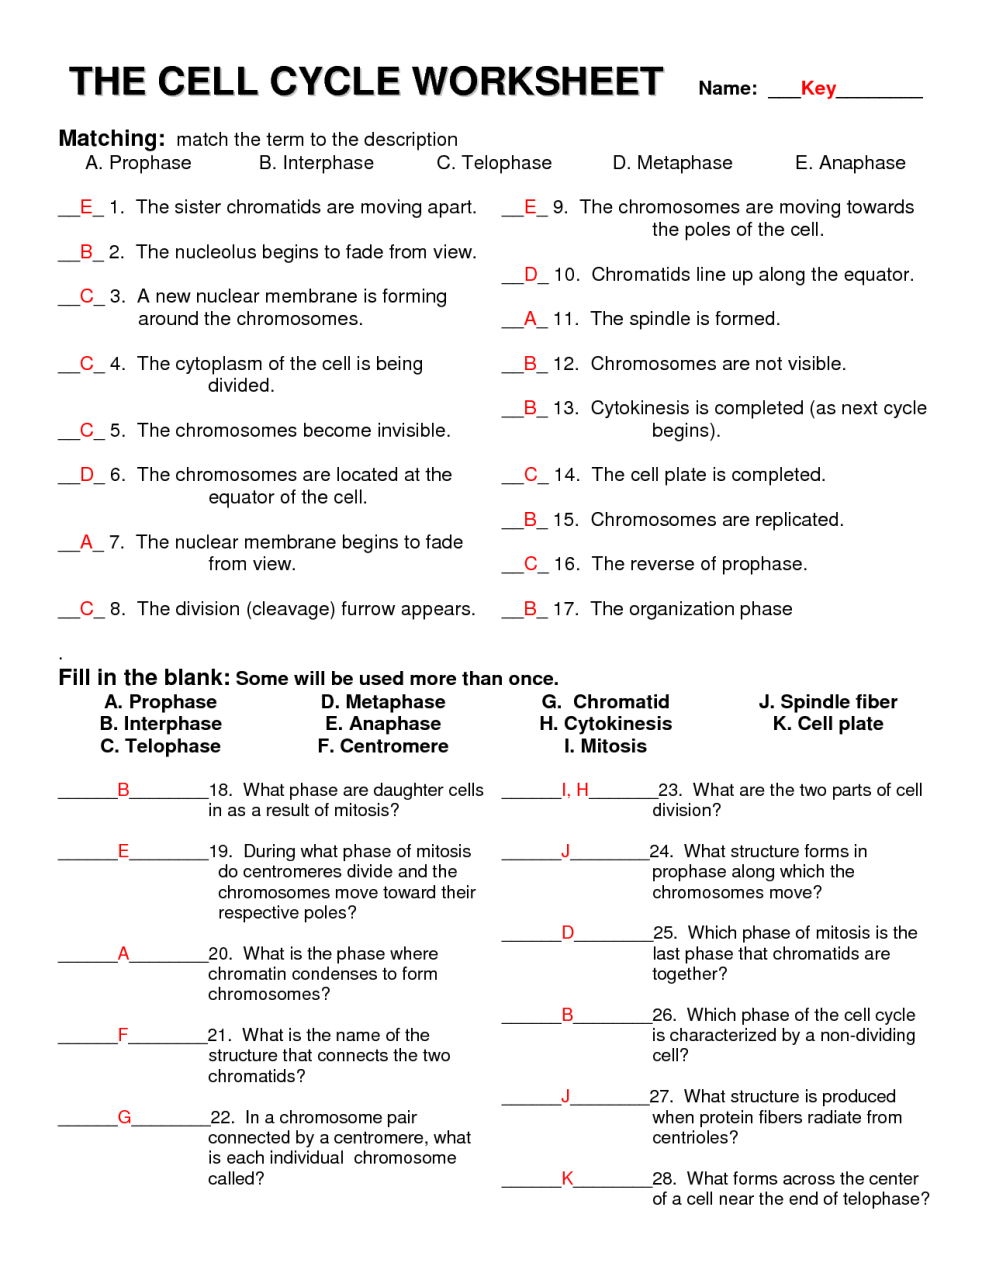 12 Best Images of Life Science Worksheet Answer Cell Cycle Worksheet